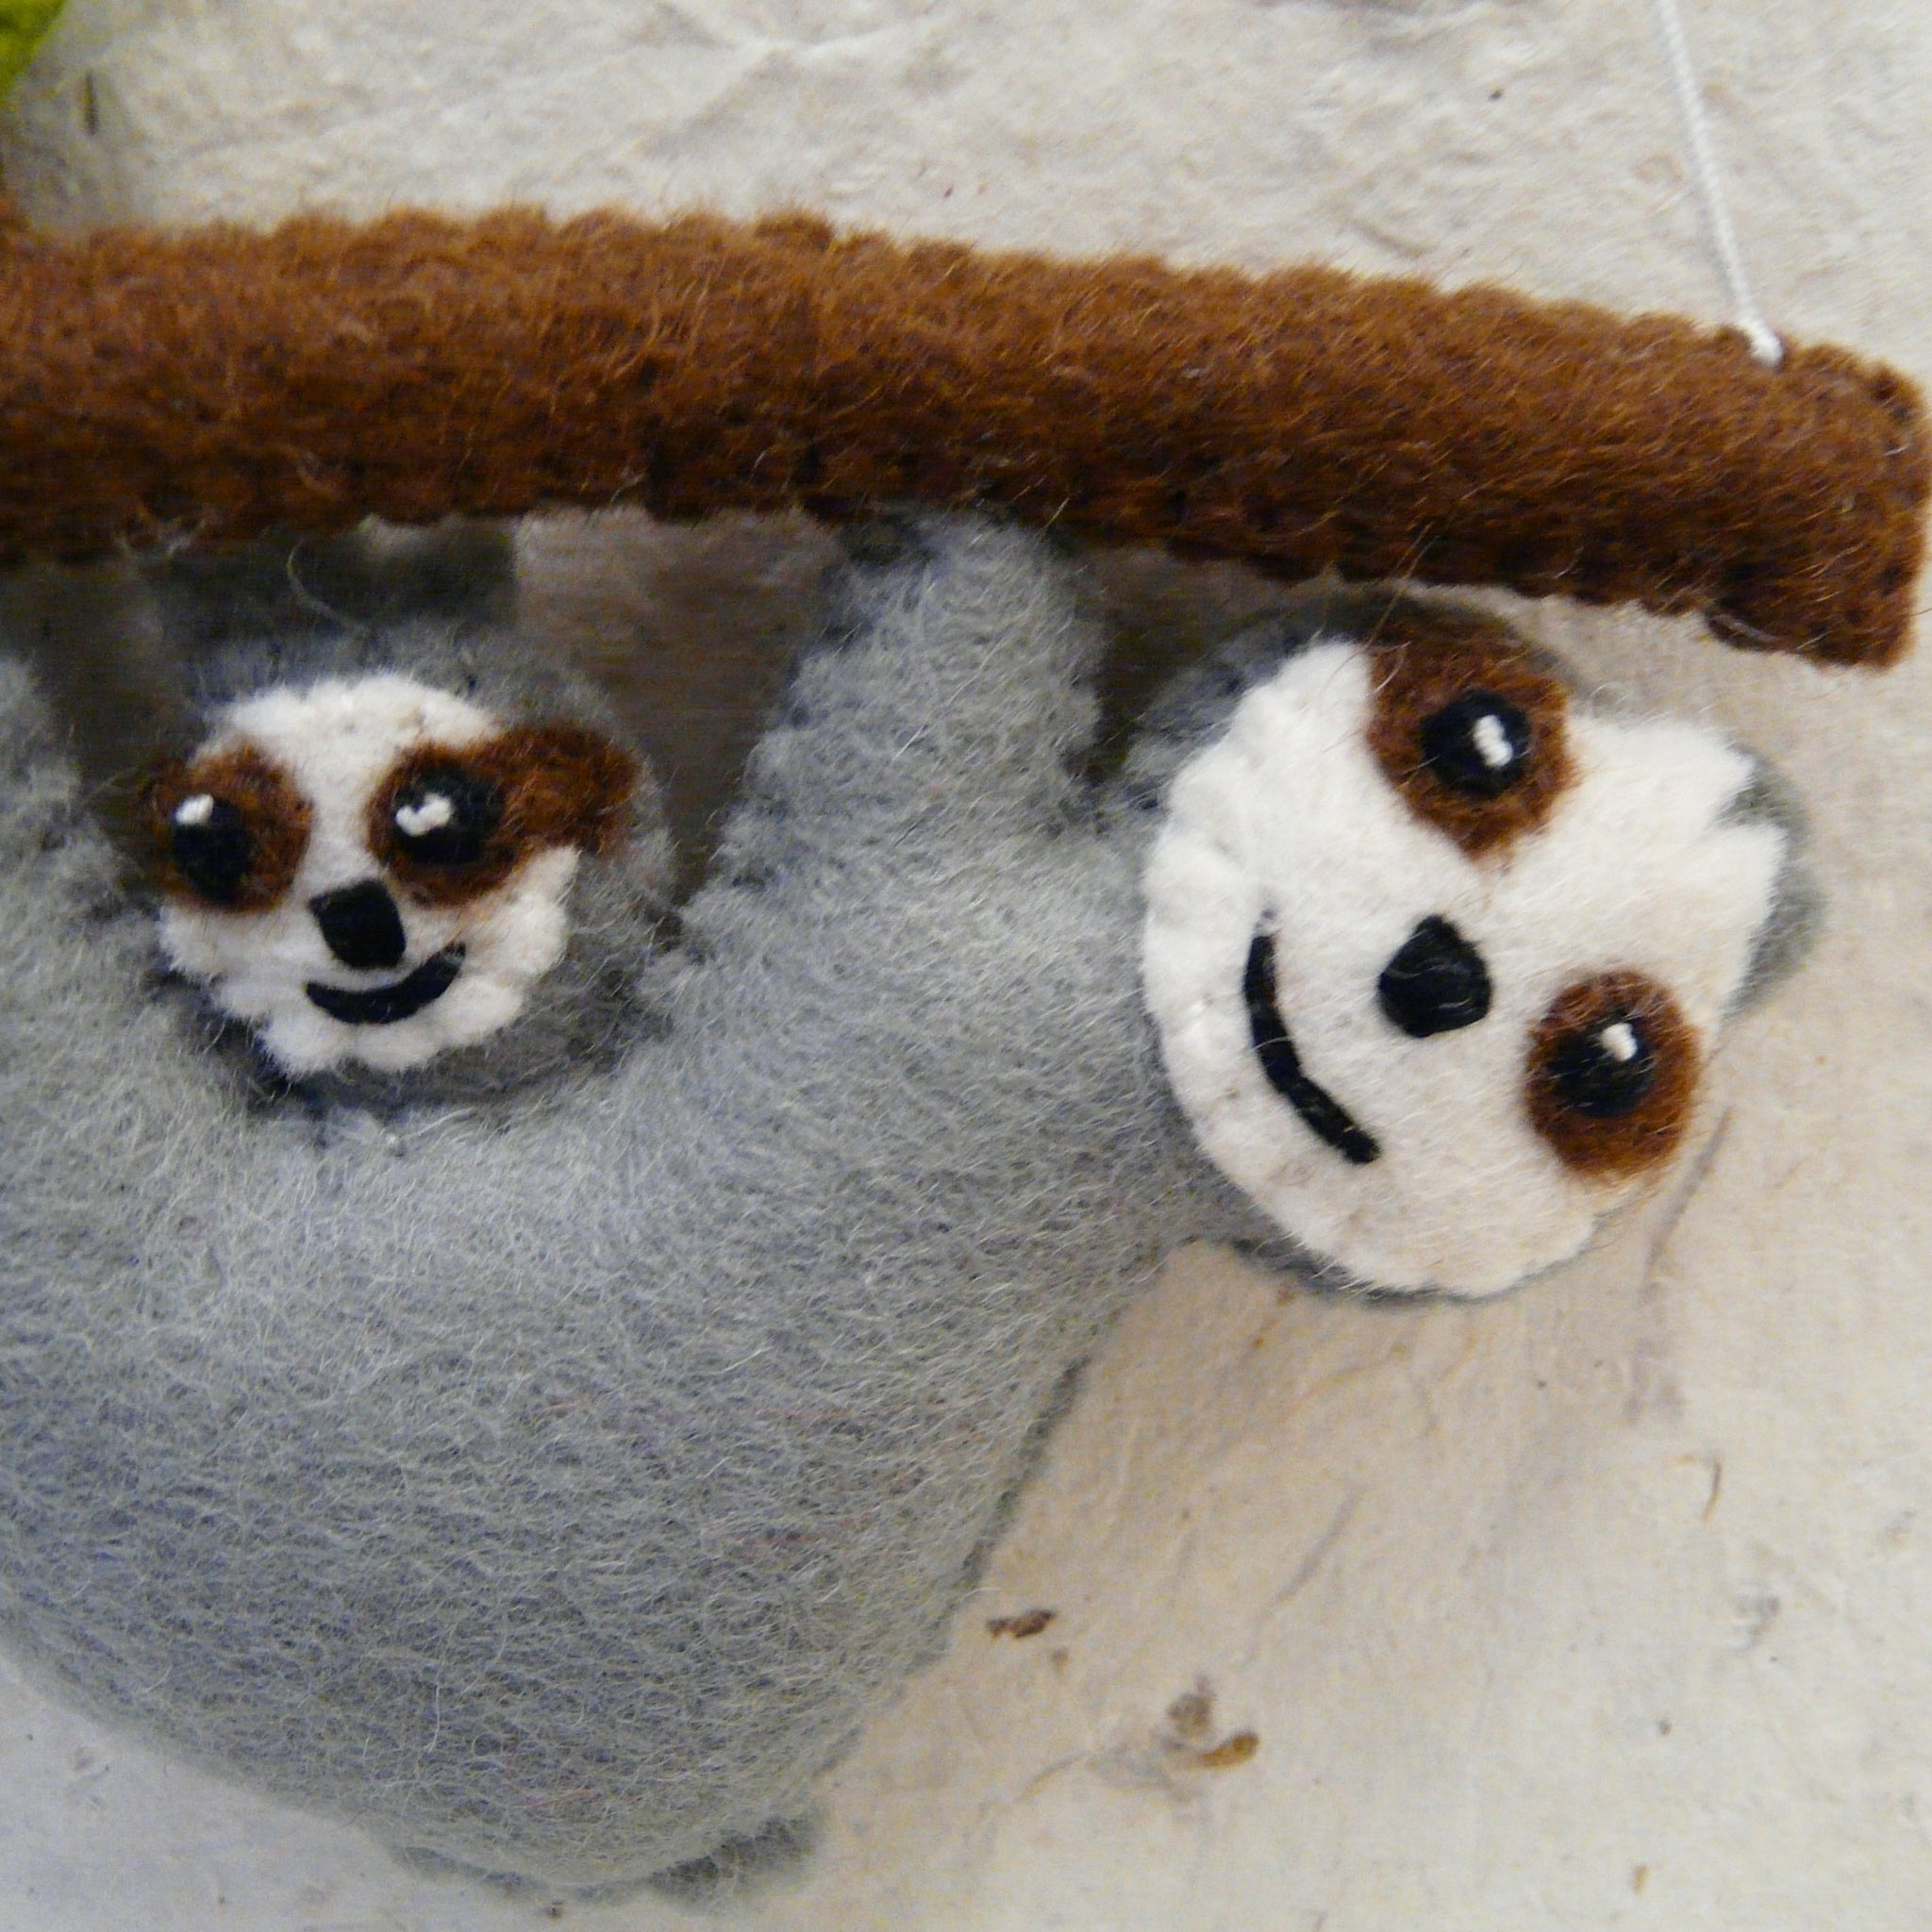 Hanging Felt Sloth Mother and Baby